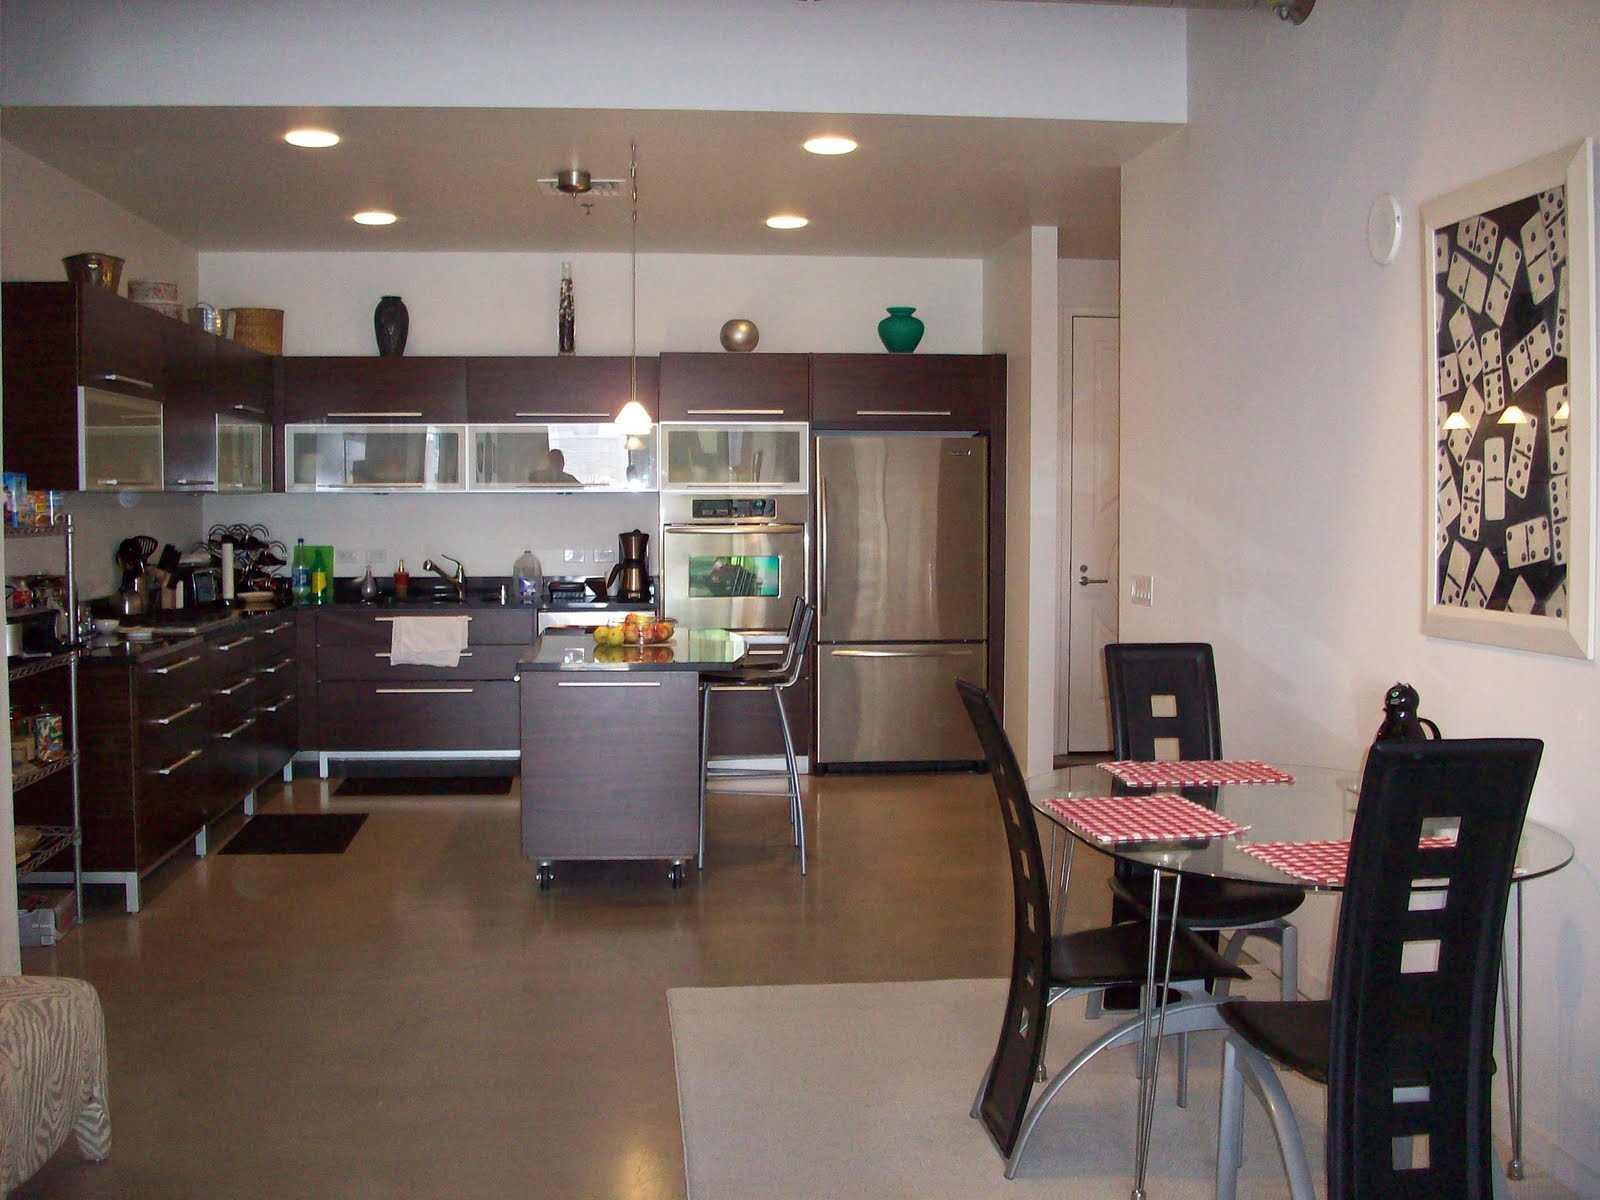 Las Vegas Condo 906 For Temp Swap Or Rent Foyer Kitchen Dining